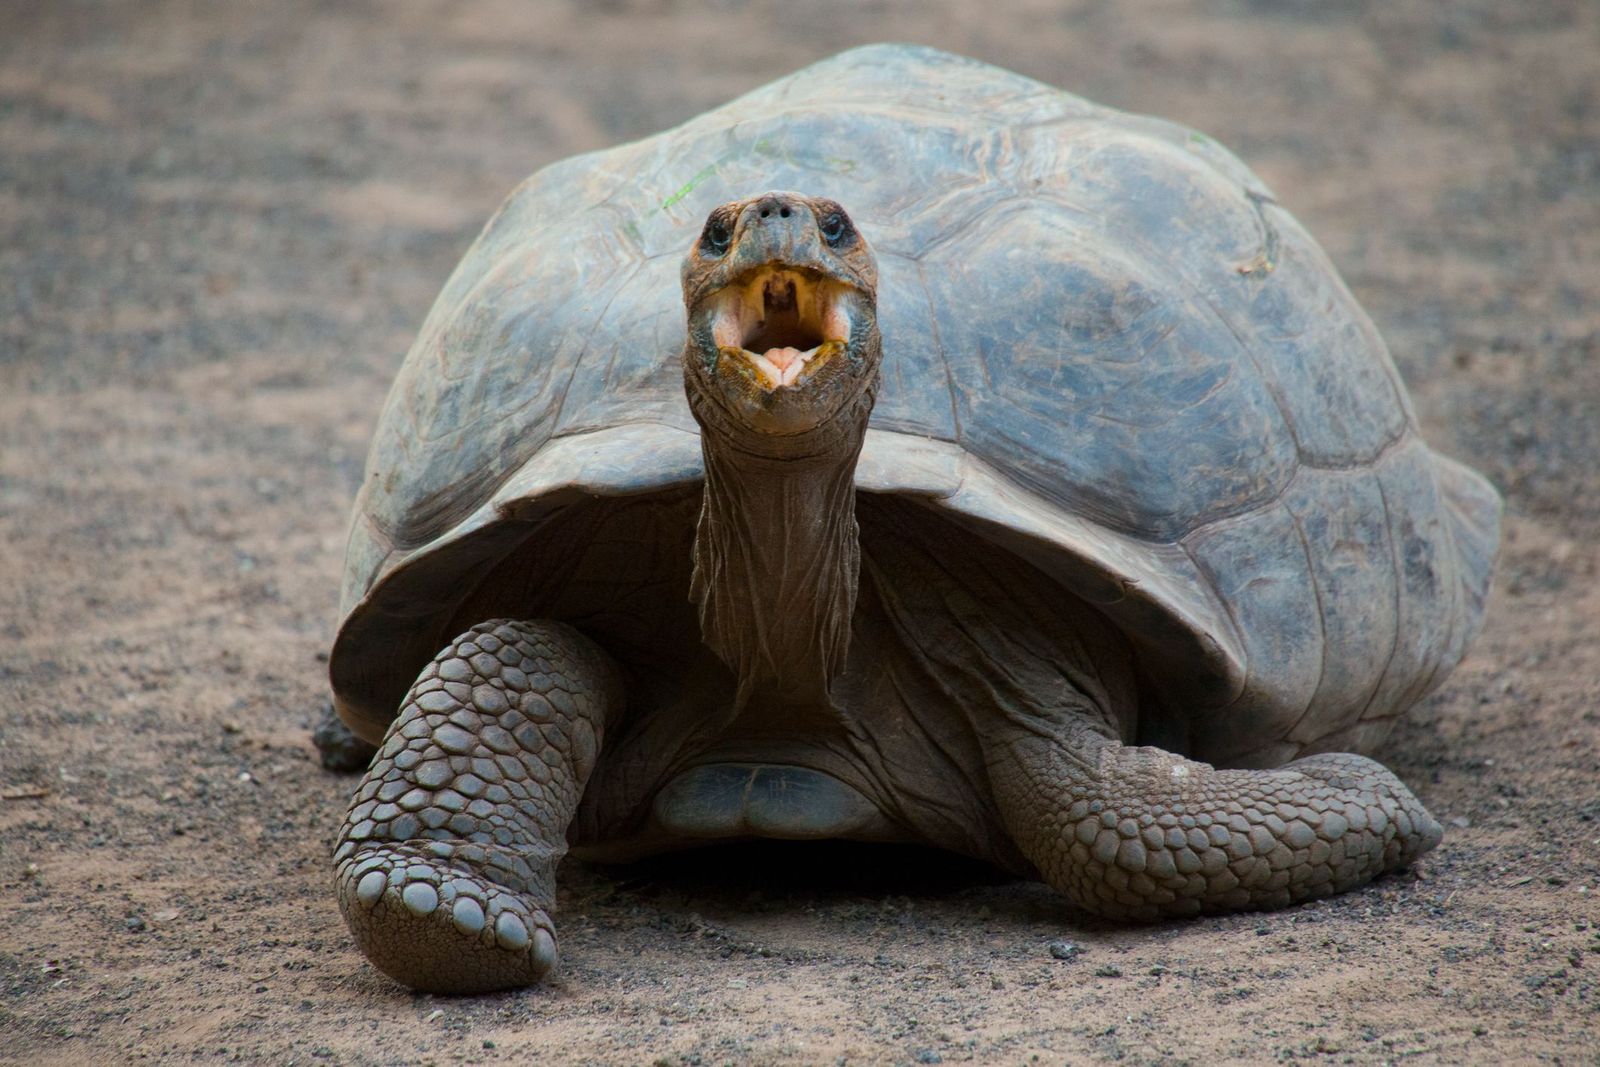 A Galapagos giant tortoise, one of the most famous residents on the Galapagos Islands. Photo: Getty.